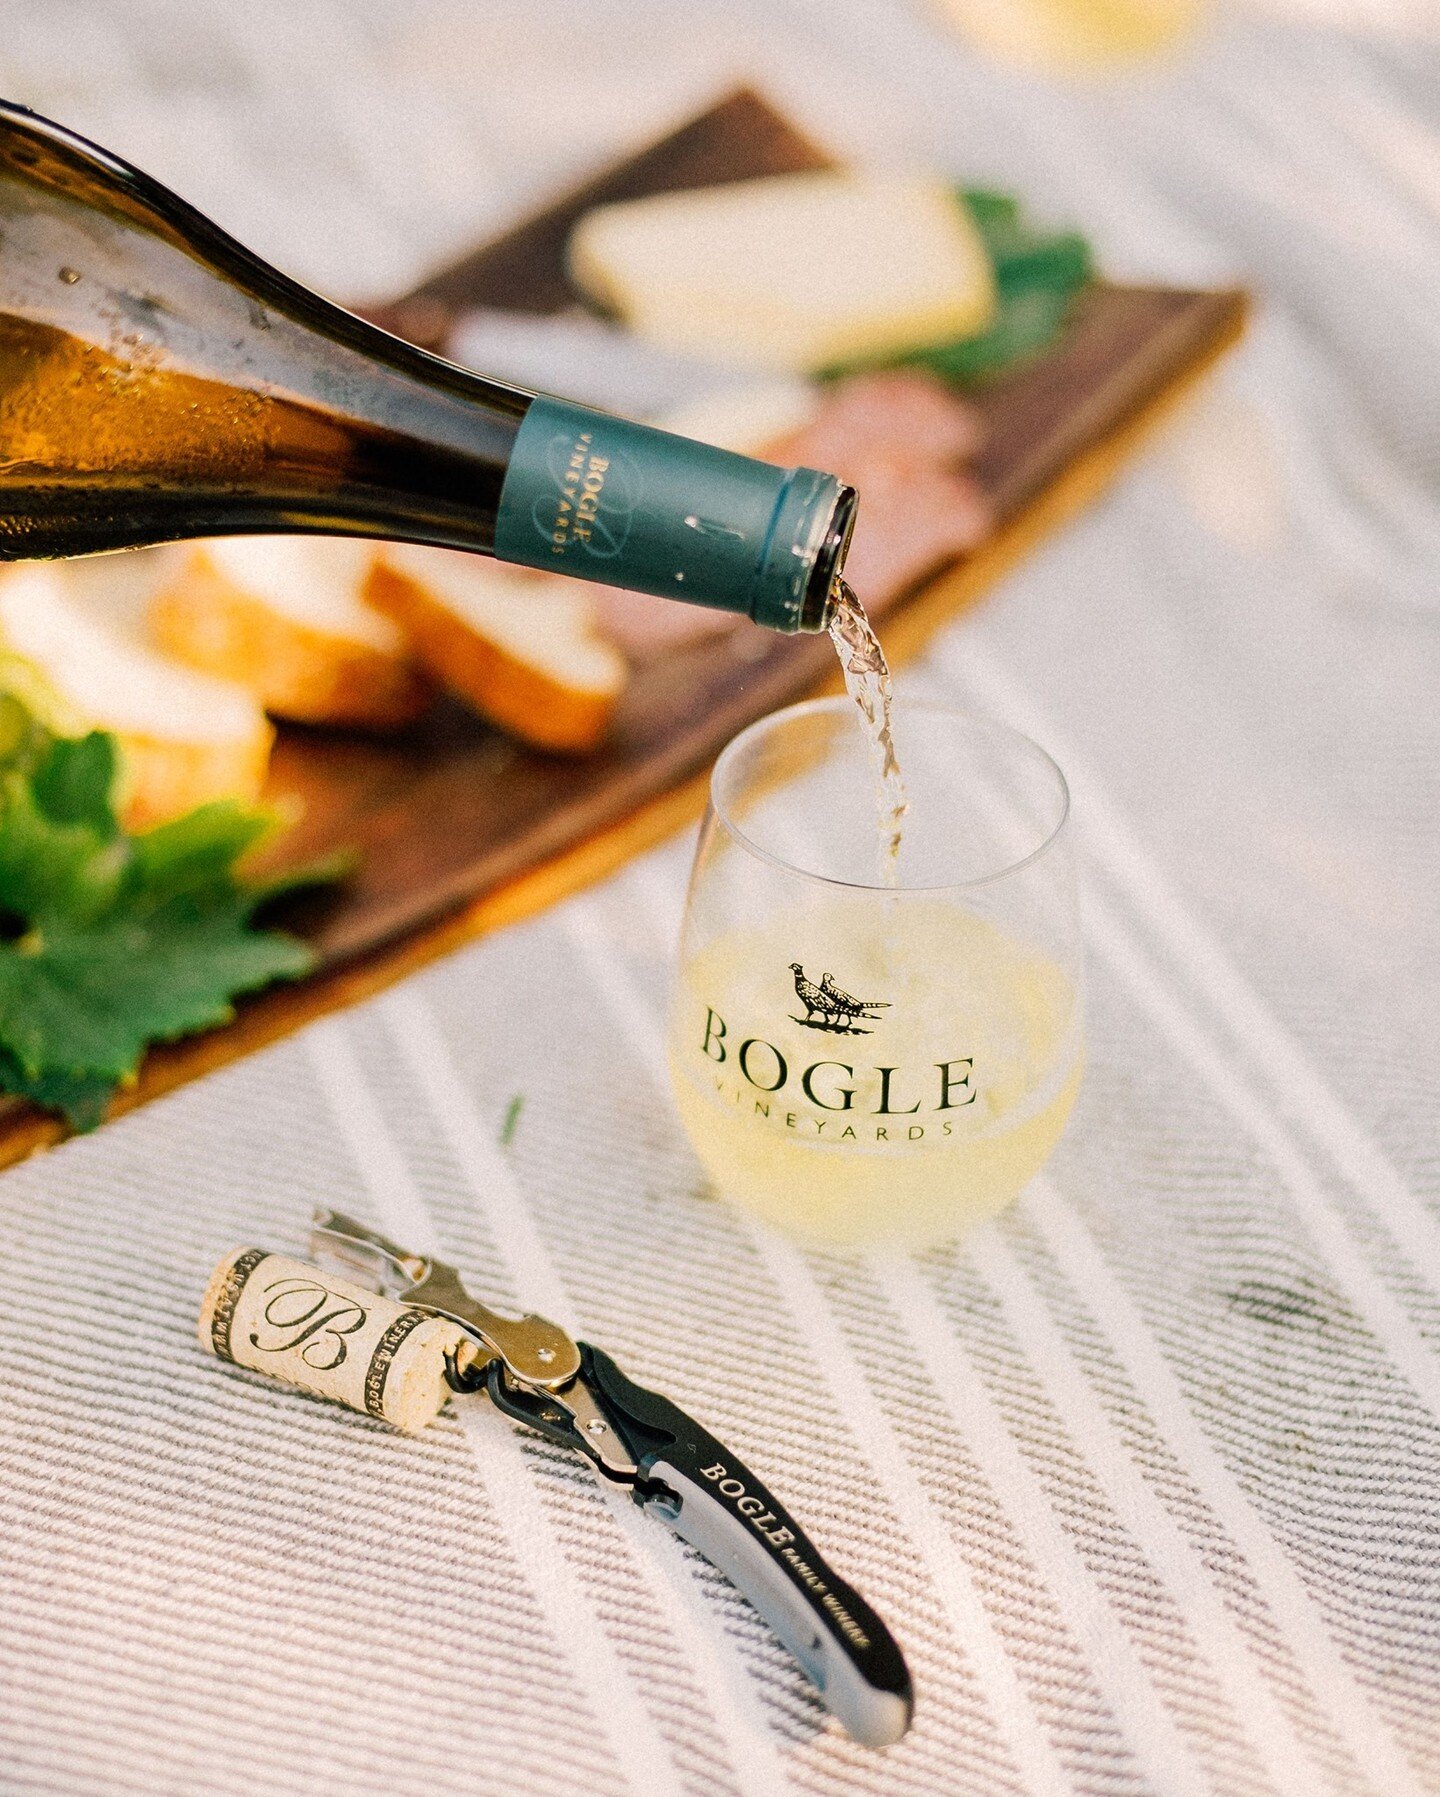 🍷🍾 WINE // Looking for a gift or something to bring to a party? Why not try a bottle of Bogle Vineyards wine? @boglevineyards is an award-winning winery comprised of artisan winemakers and barrel fermented wines. If you're not sure which wine to ge